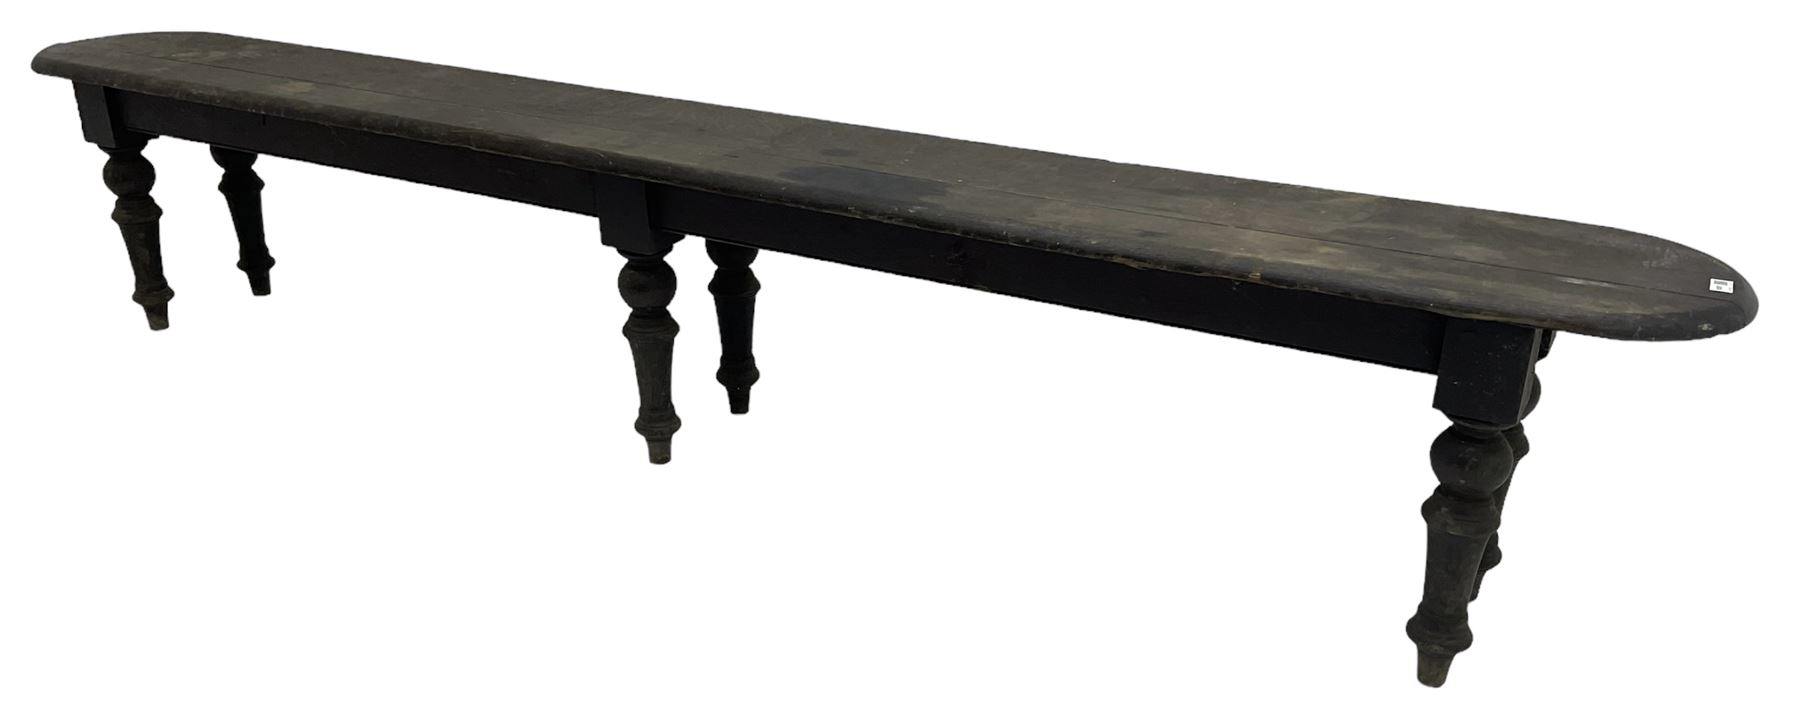 Large 19th century stained oak 9' hall bench - Image 5 of 8